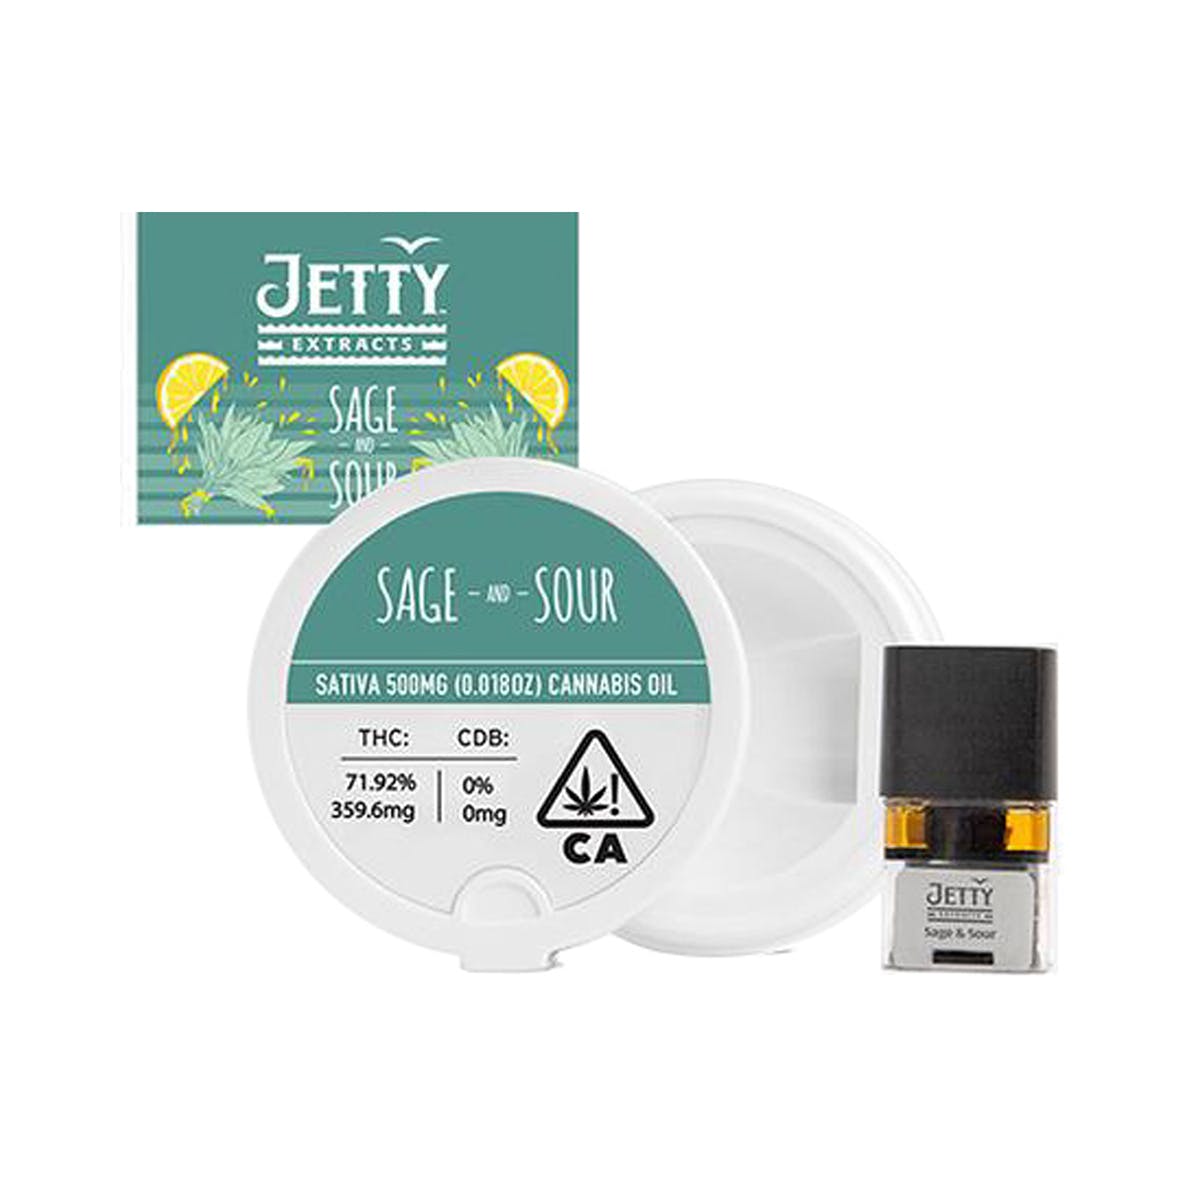 PAX Era Pod - Jetty Extracts Sage N Sour